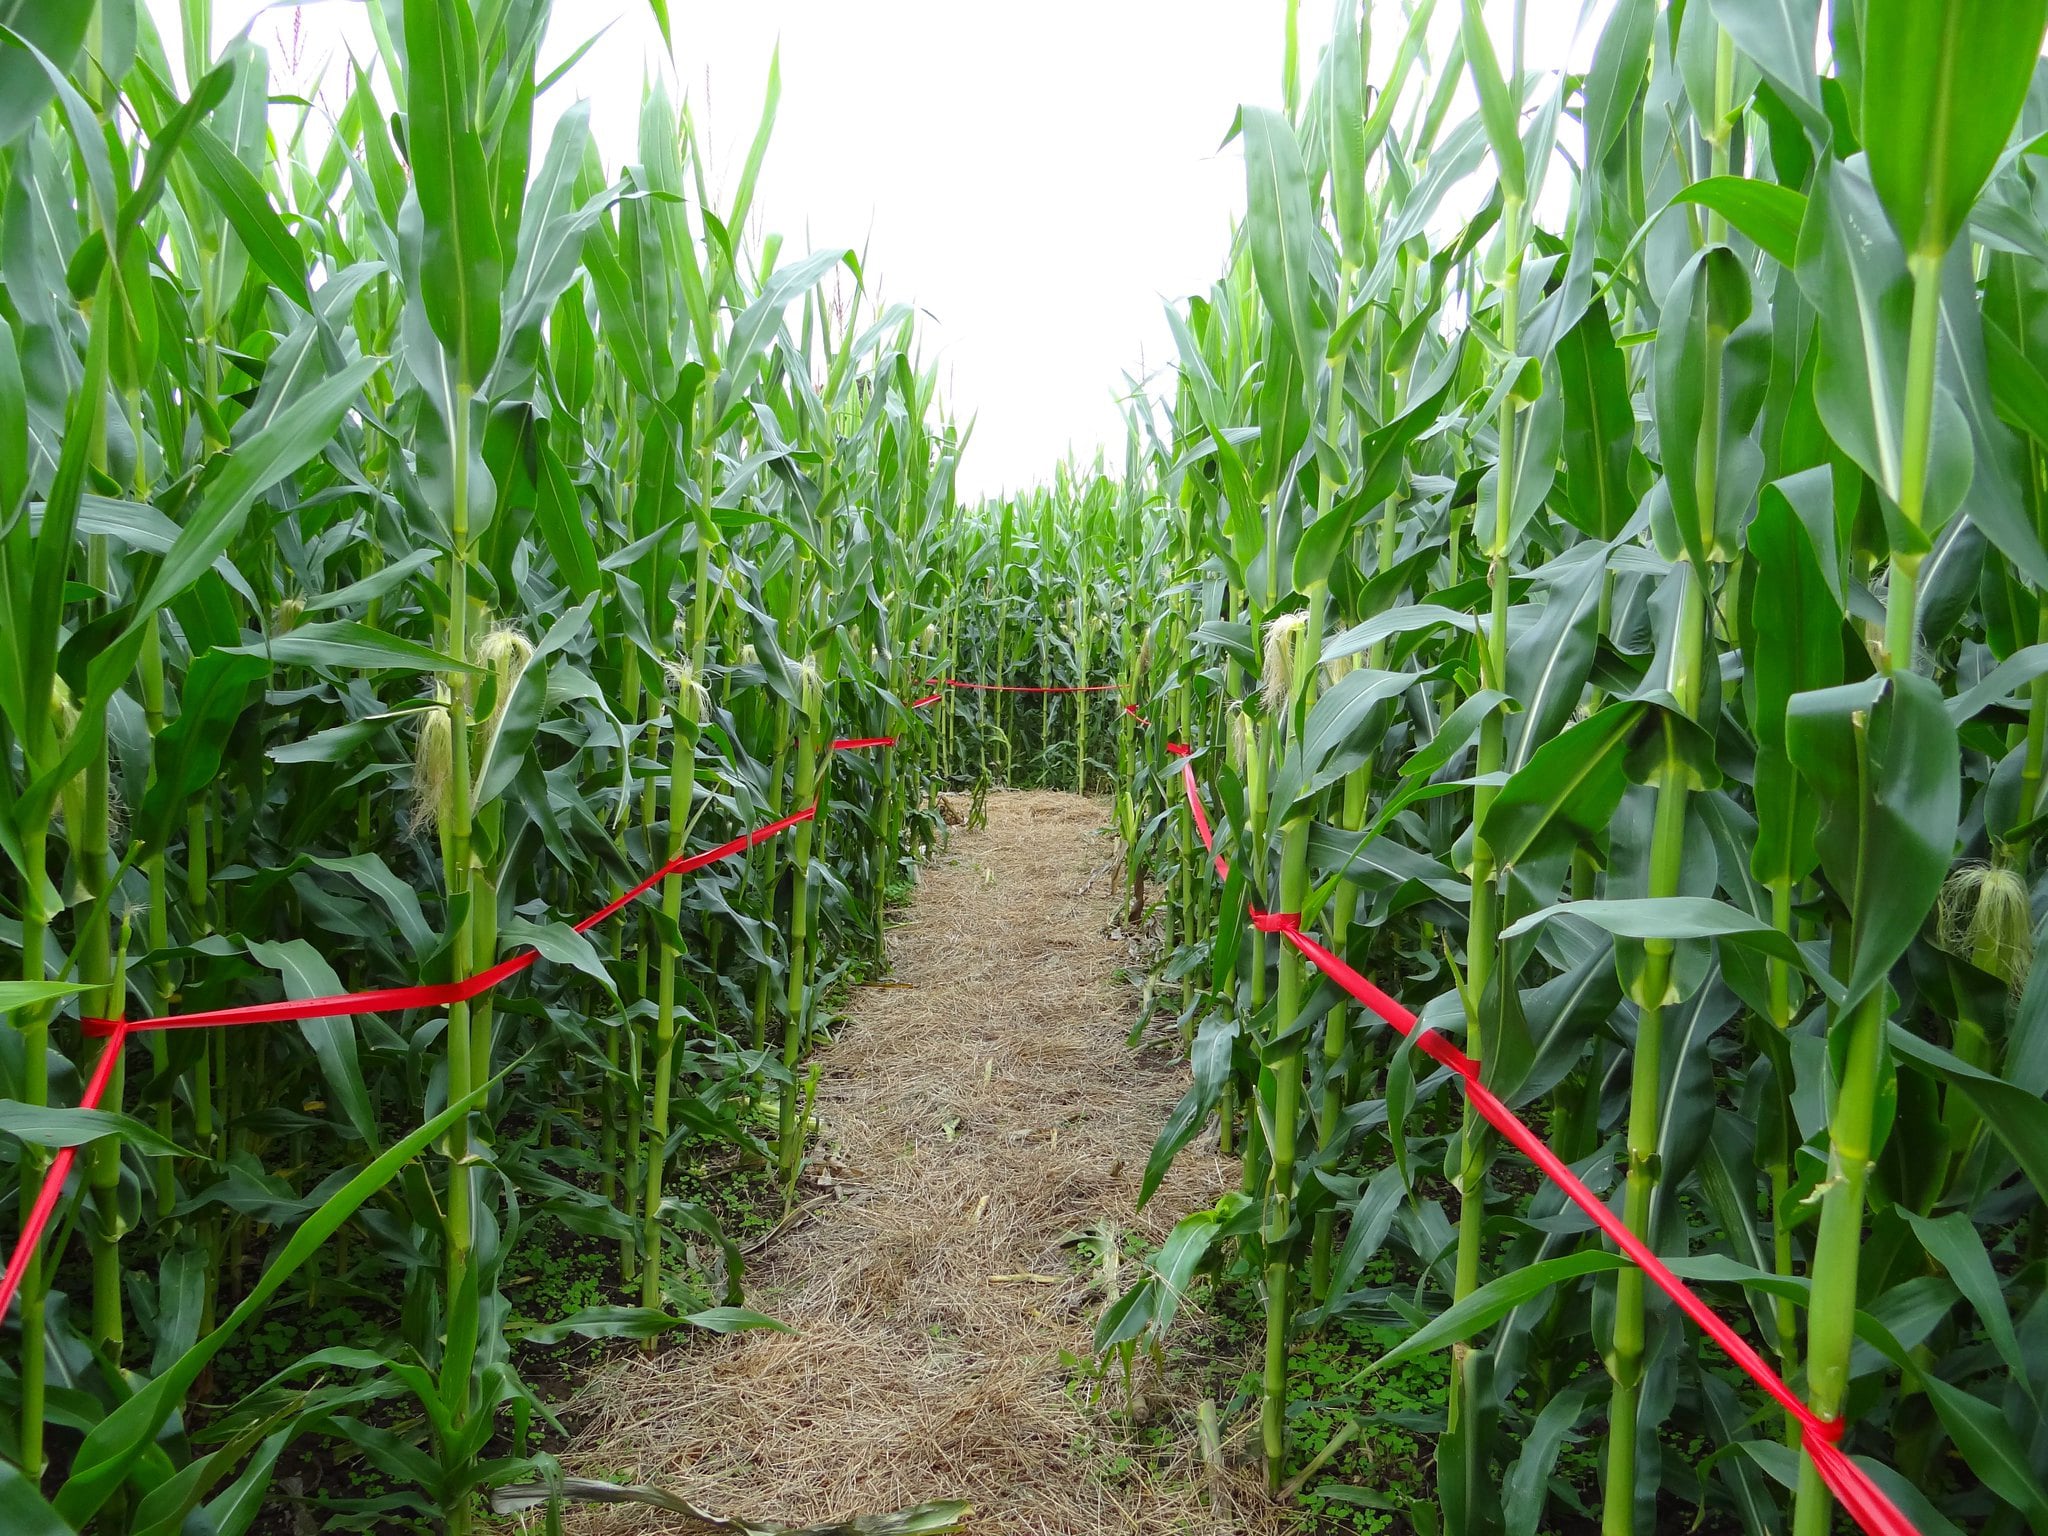 horizontal photo showing a corn maze path with red tape along the corn, which is young and very green, but quite tall